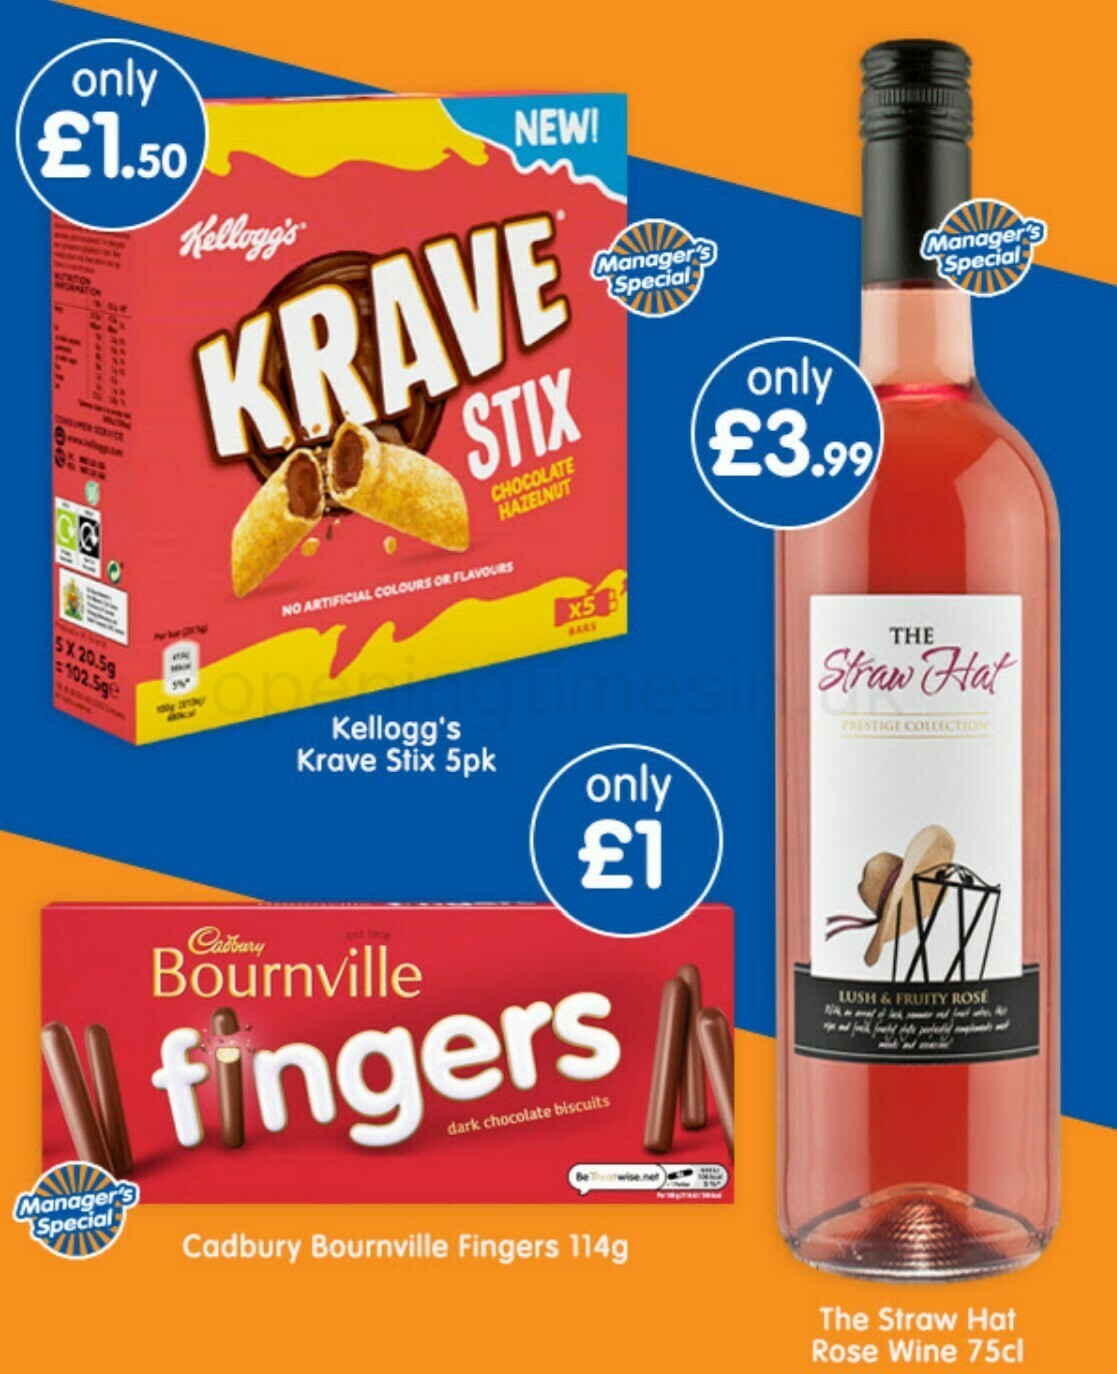 B&M Manager's Specials Offers from 11 May